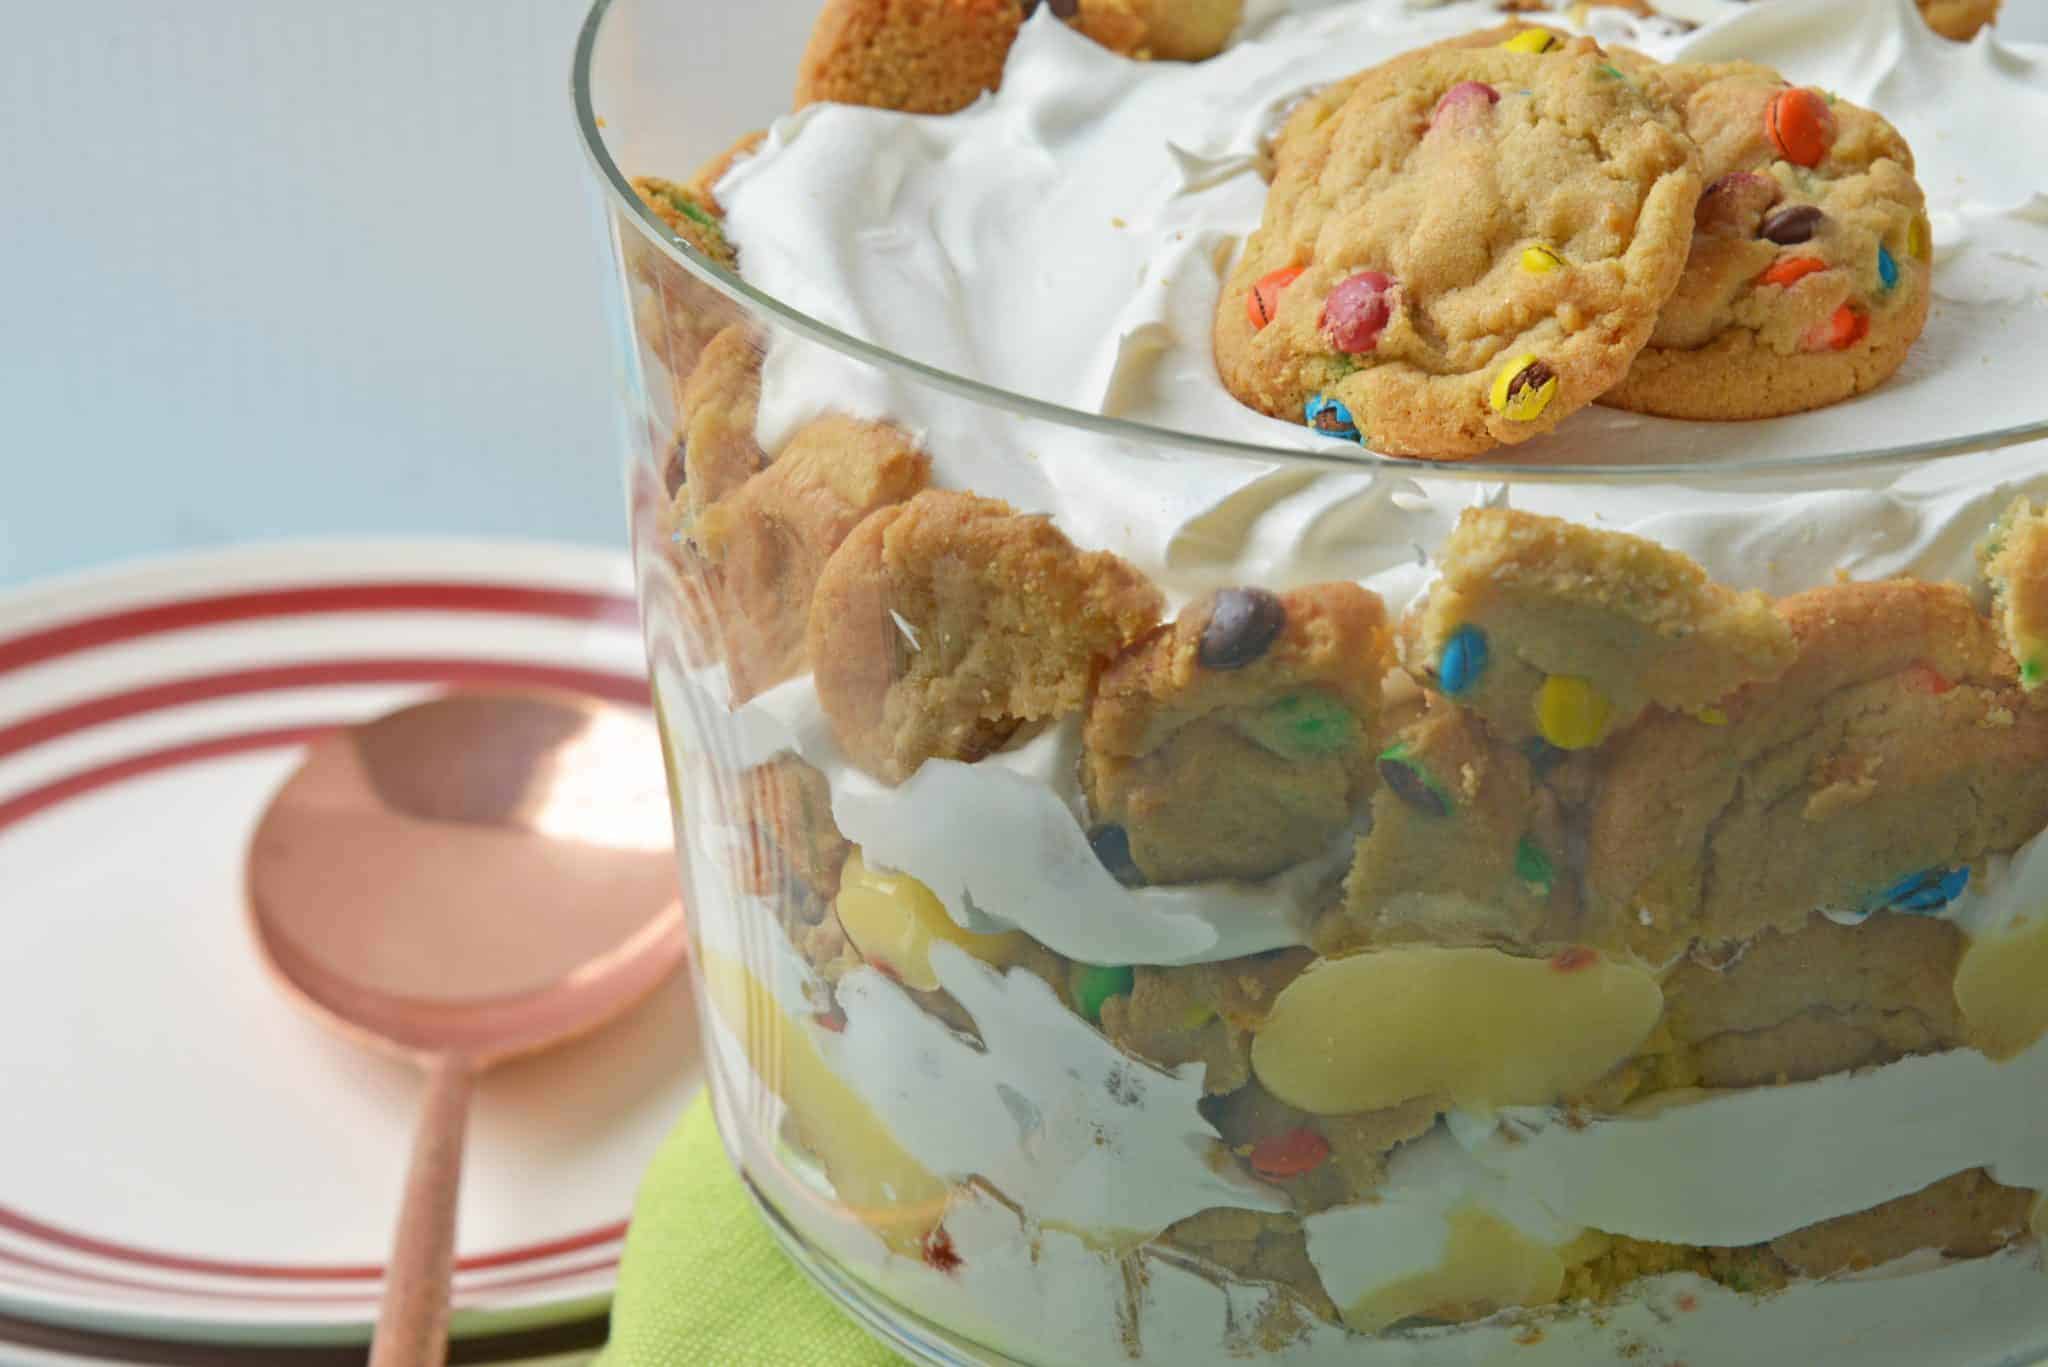 This Cookie Trifle recipe is a super easy trifle recipe that only uses 3 ingredients! Chocolate and butterscotch chip cookies, layered with vanilla custard and whipped cream! #cookiebomb #cookietrifle #triflerecipe www.savoryexperiments.com